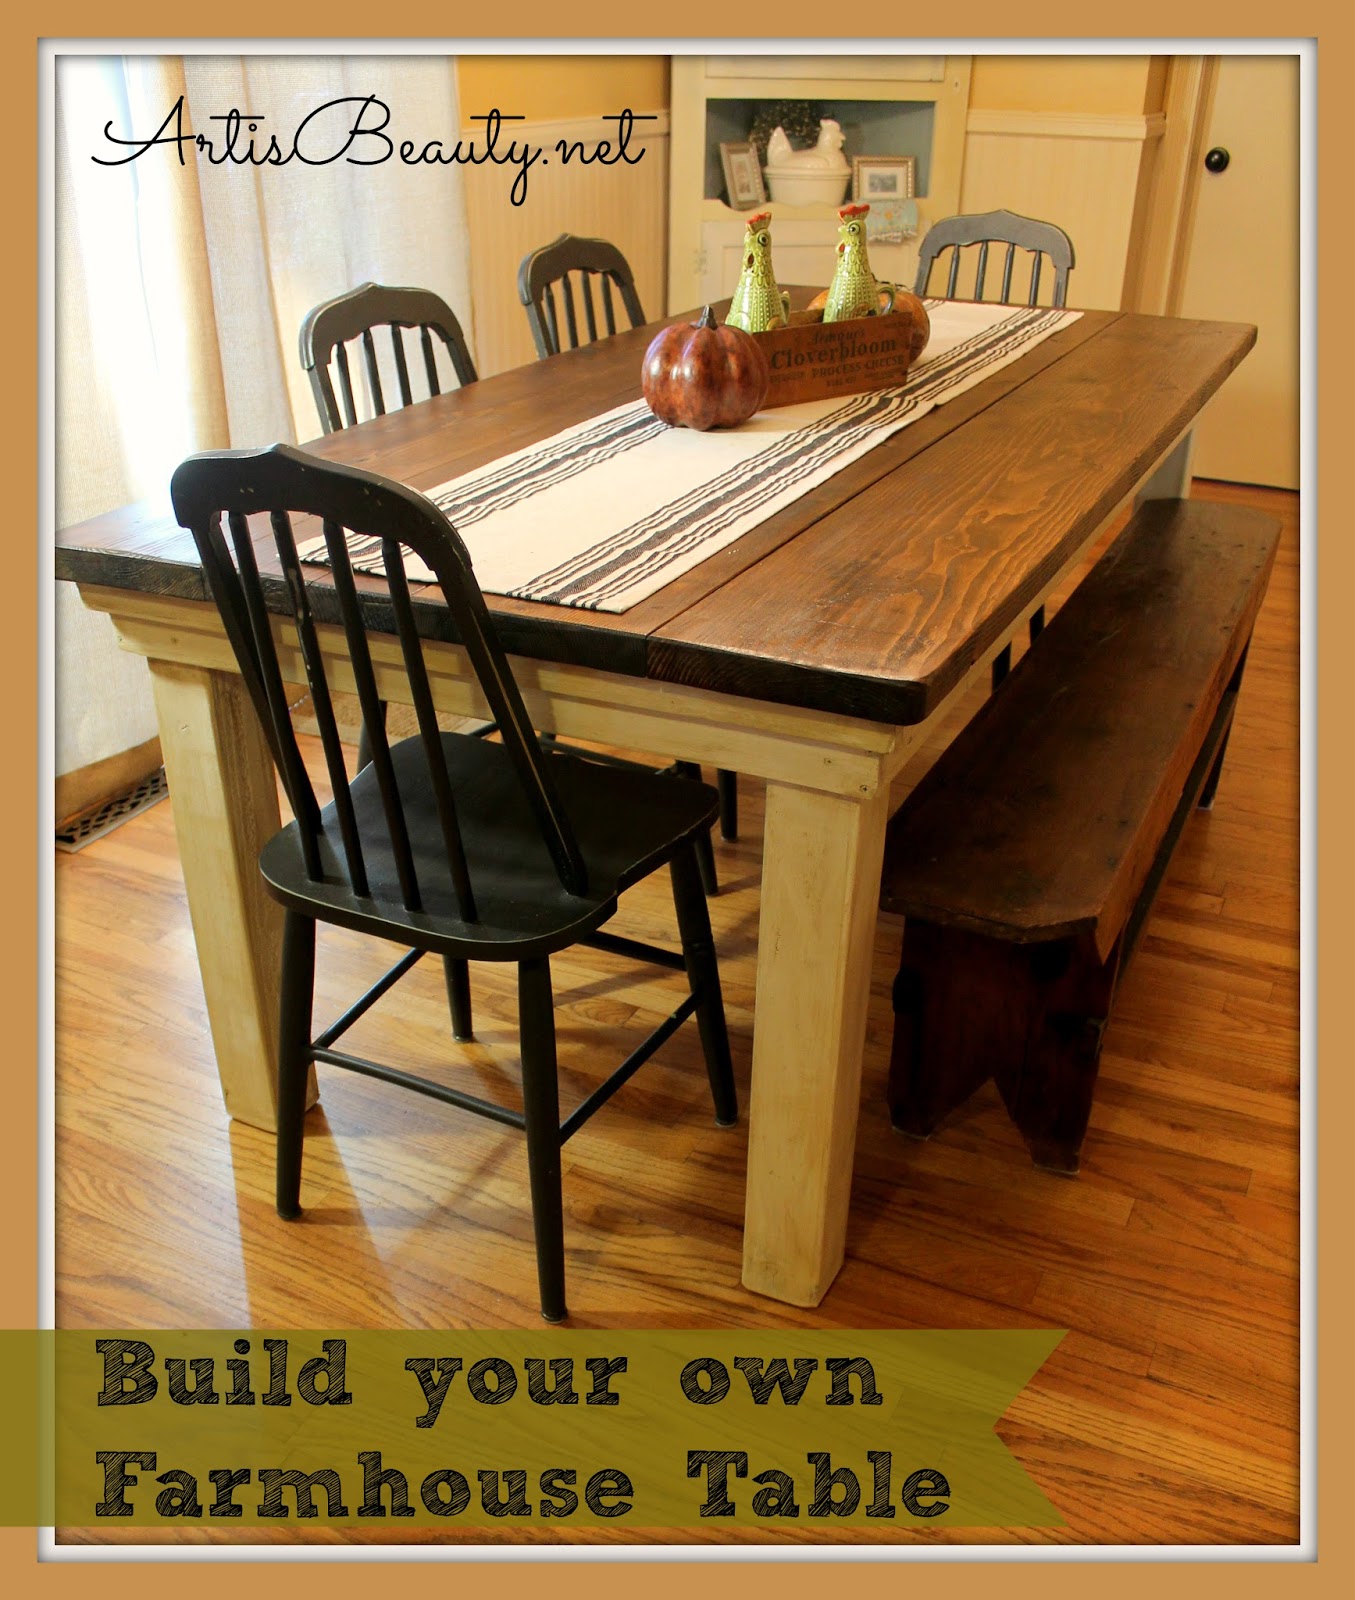 How to build your own FarmHouse Table for under $100